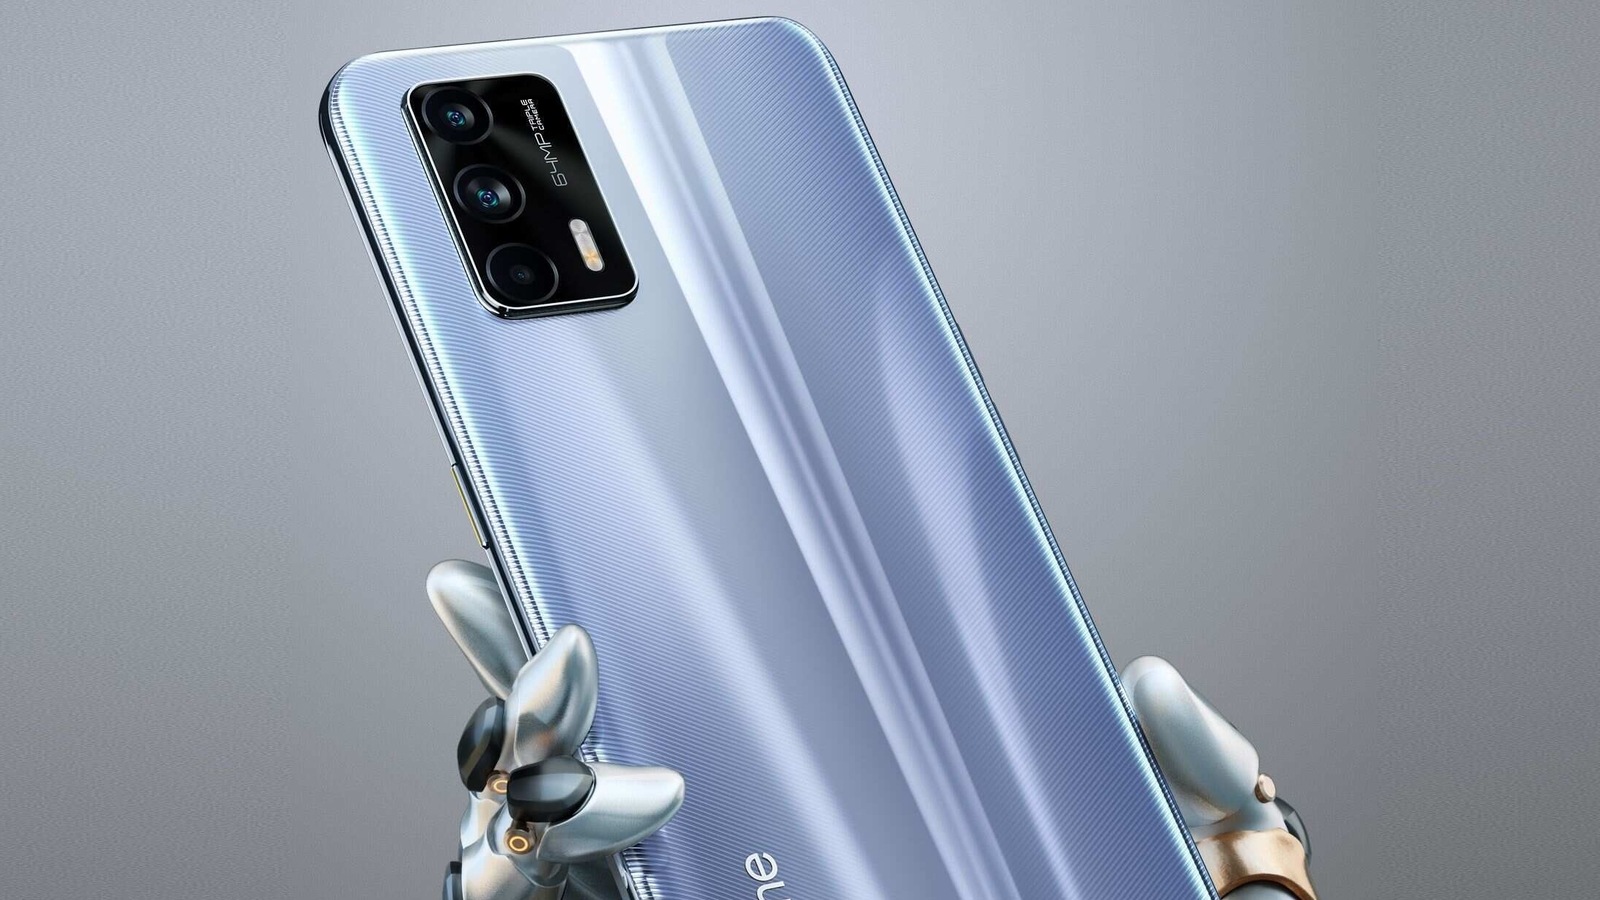 Realme will launch a Dimensity 1200-powered version of the GT Neo2 soon -   News